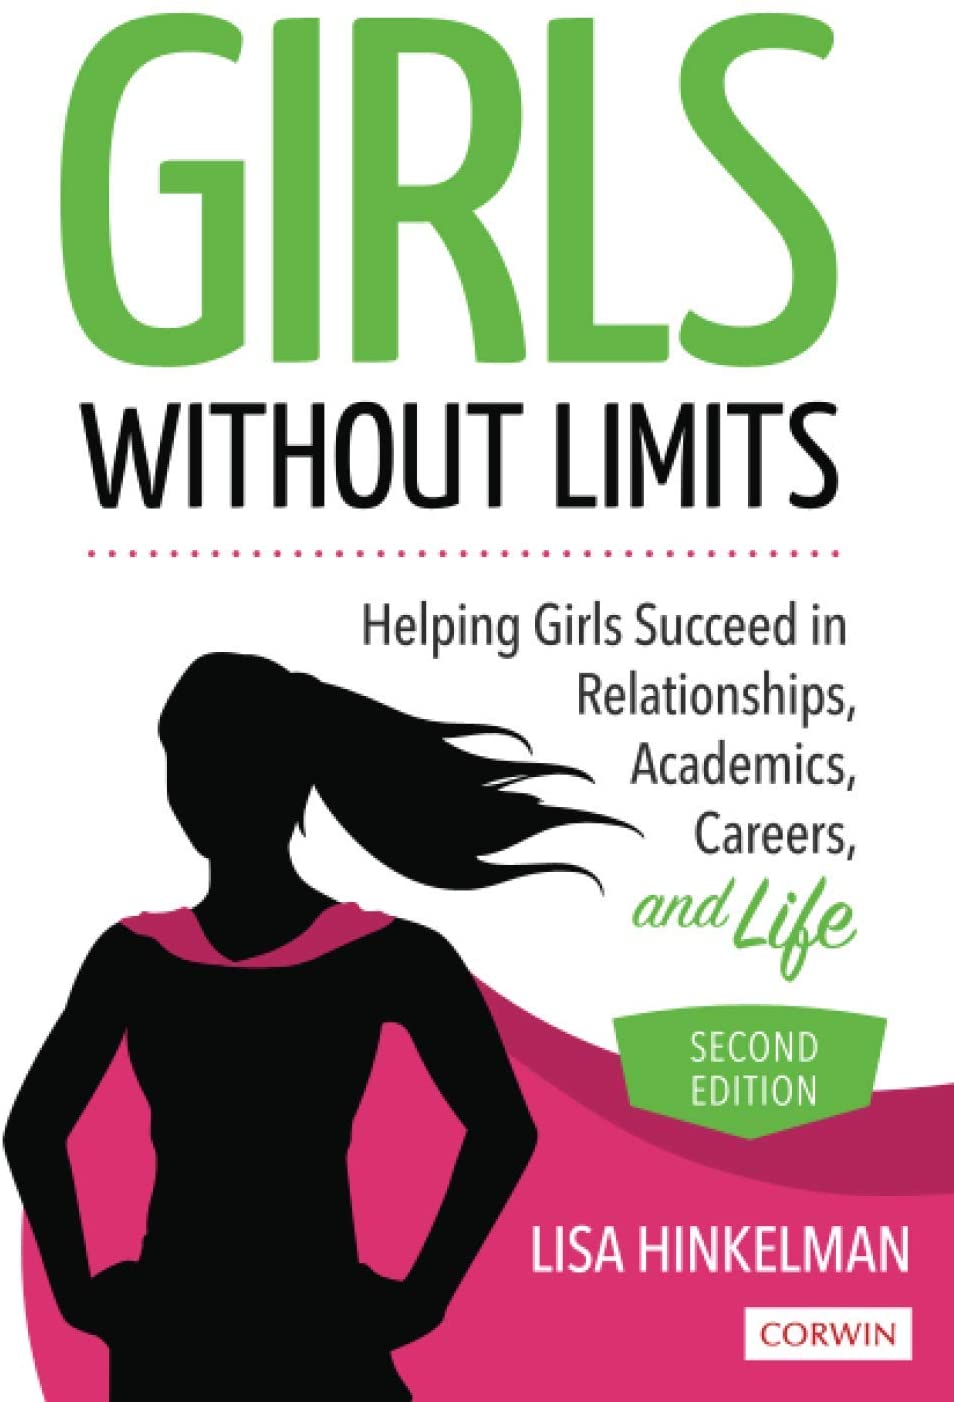 Girls Without Limits: Helping Girls Succeed in Relationships, Academics, Careers, and Life